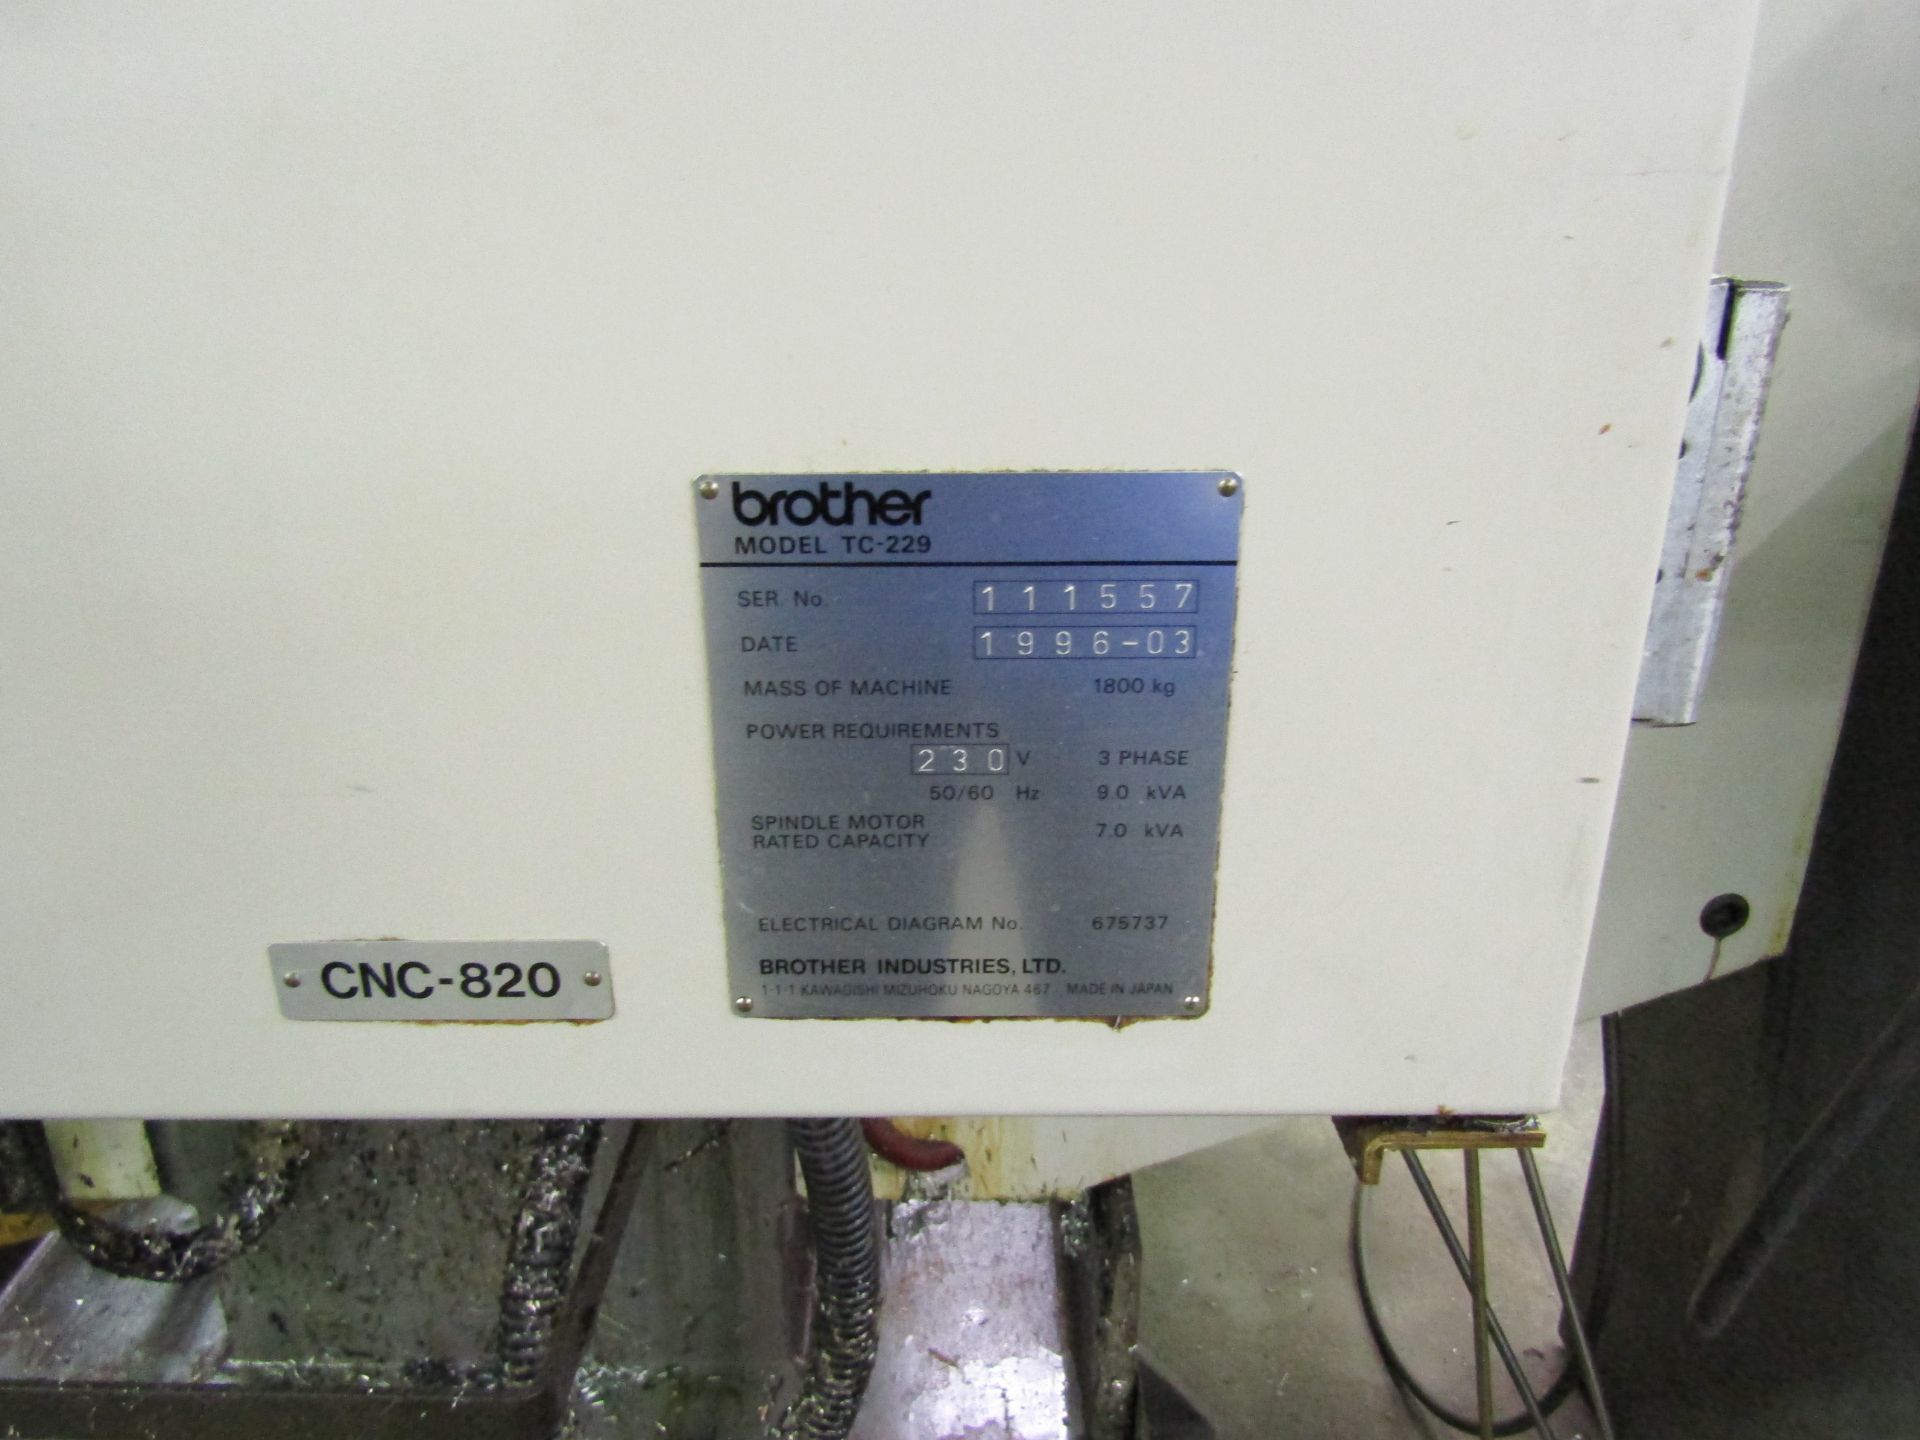 1996 BROTHER TC229 DRILL & TAPPING CNC CENTER, 10 TOOL ATC, TABLE SIZE 10"x24", BROTHER CNC CONTROL, - Image 6 of 6